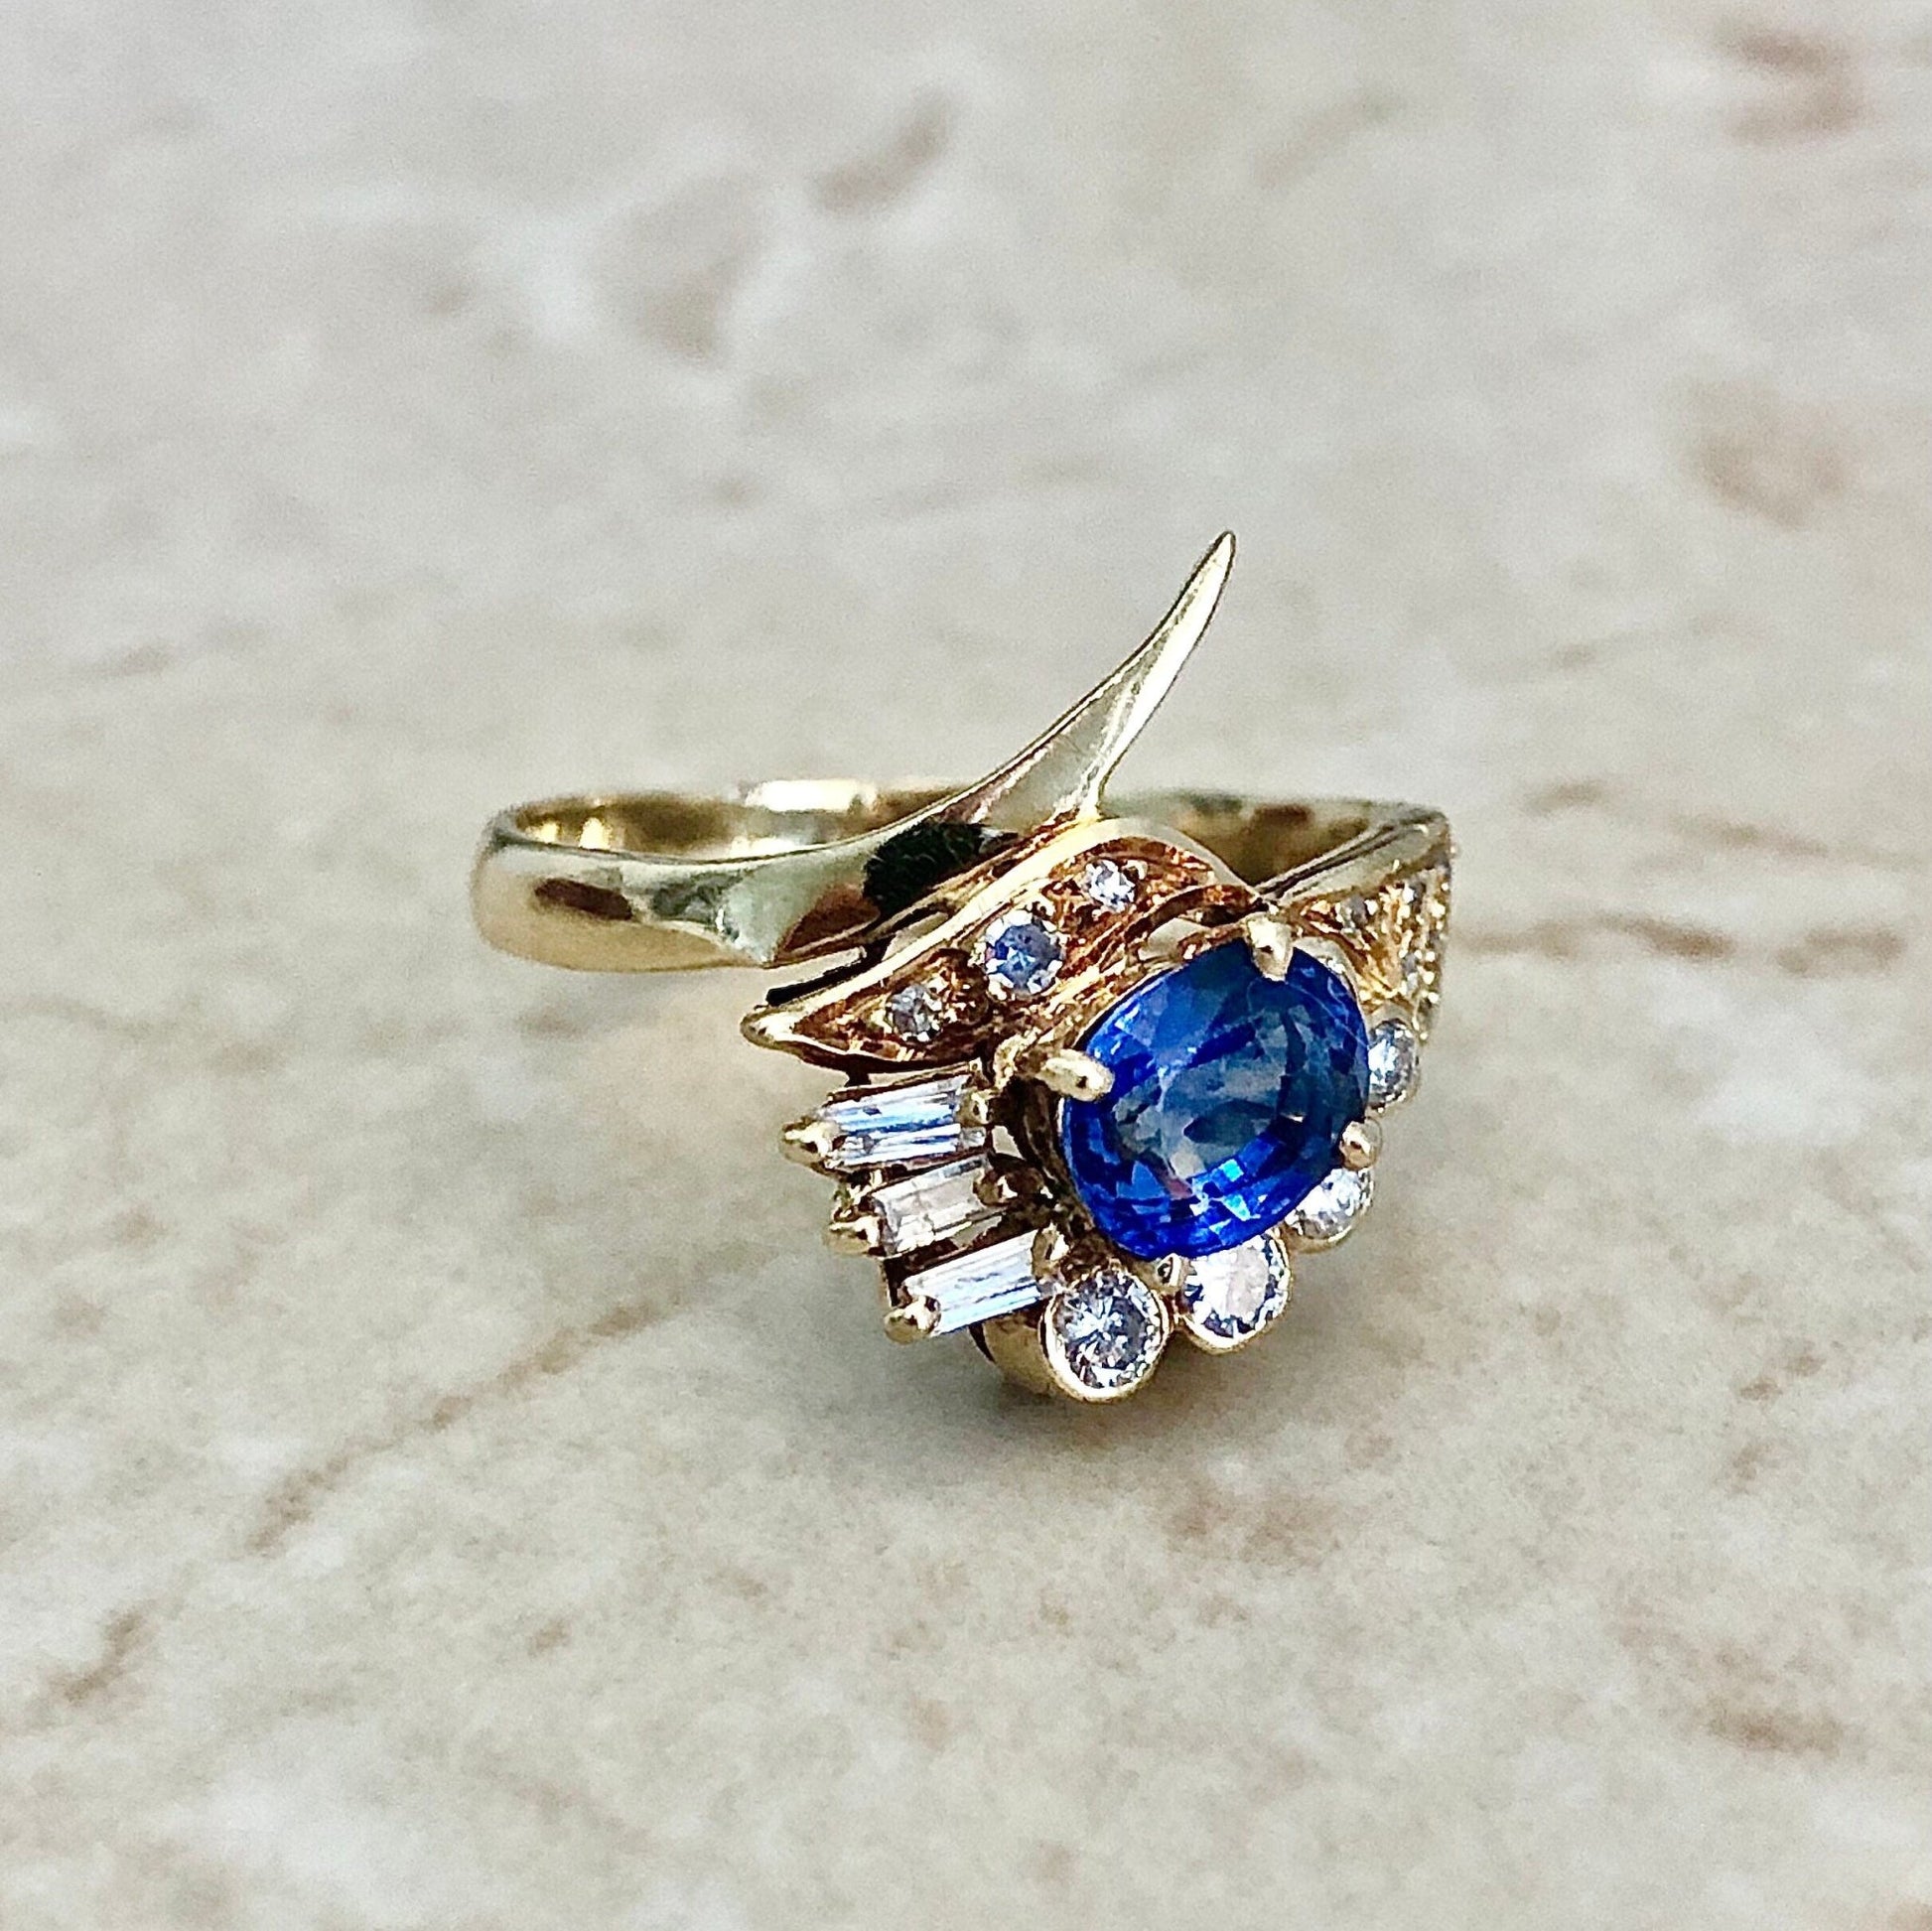 Fine Vintage 14K Sapphire Ring - Cocktail Ring - Engagement Ring - Sapphire Ring - Size 6.75 - Birthday Gift For Her - Holiday Gift